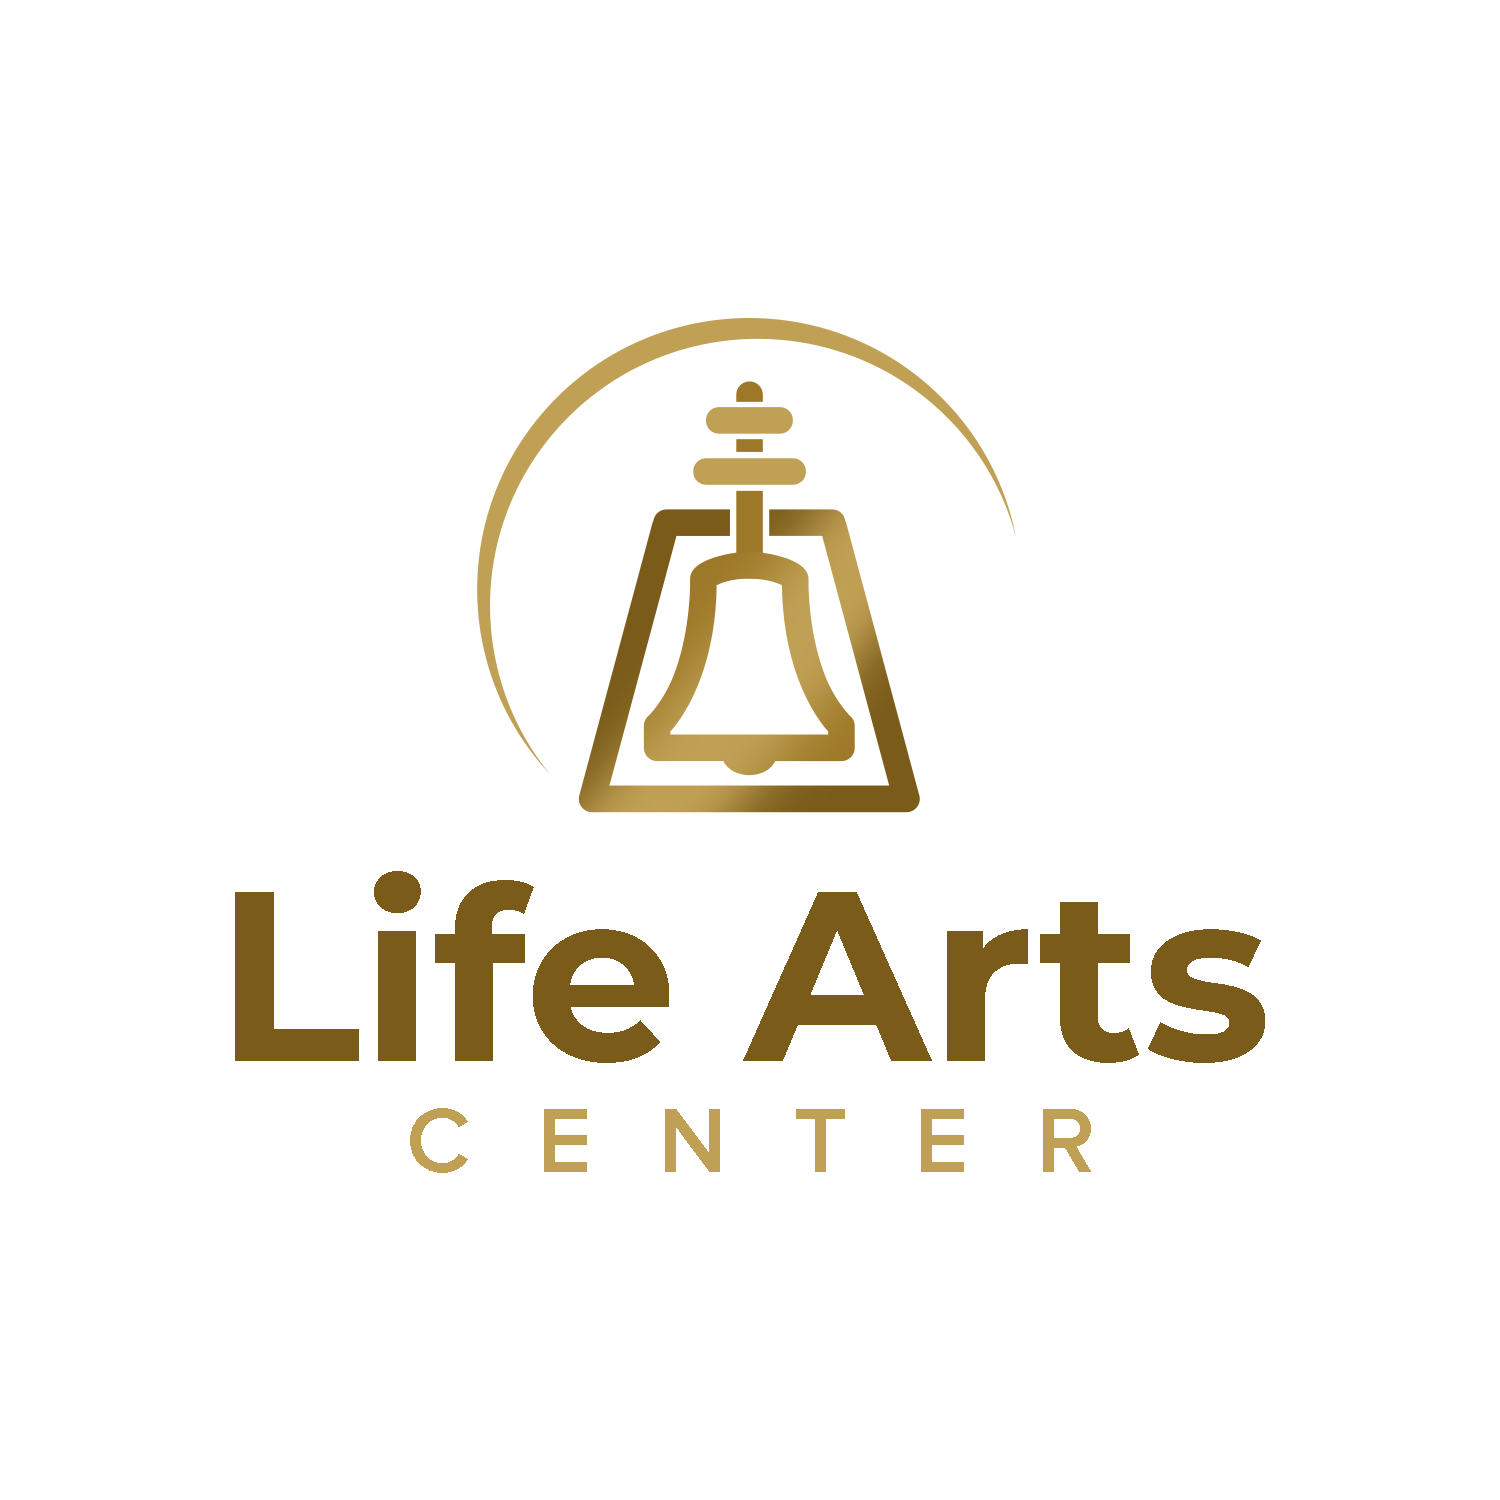 The Life Arts Event Center of Riverside